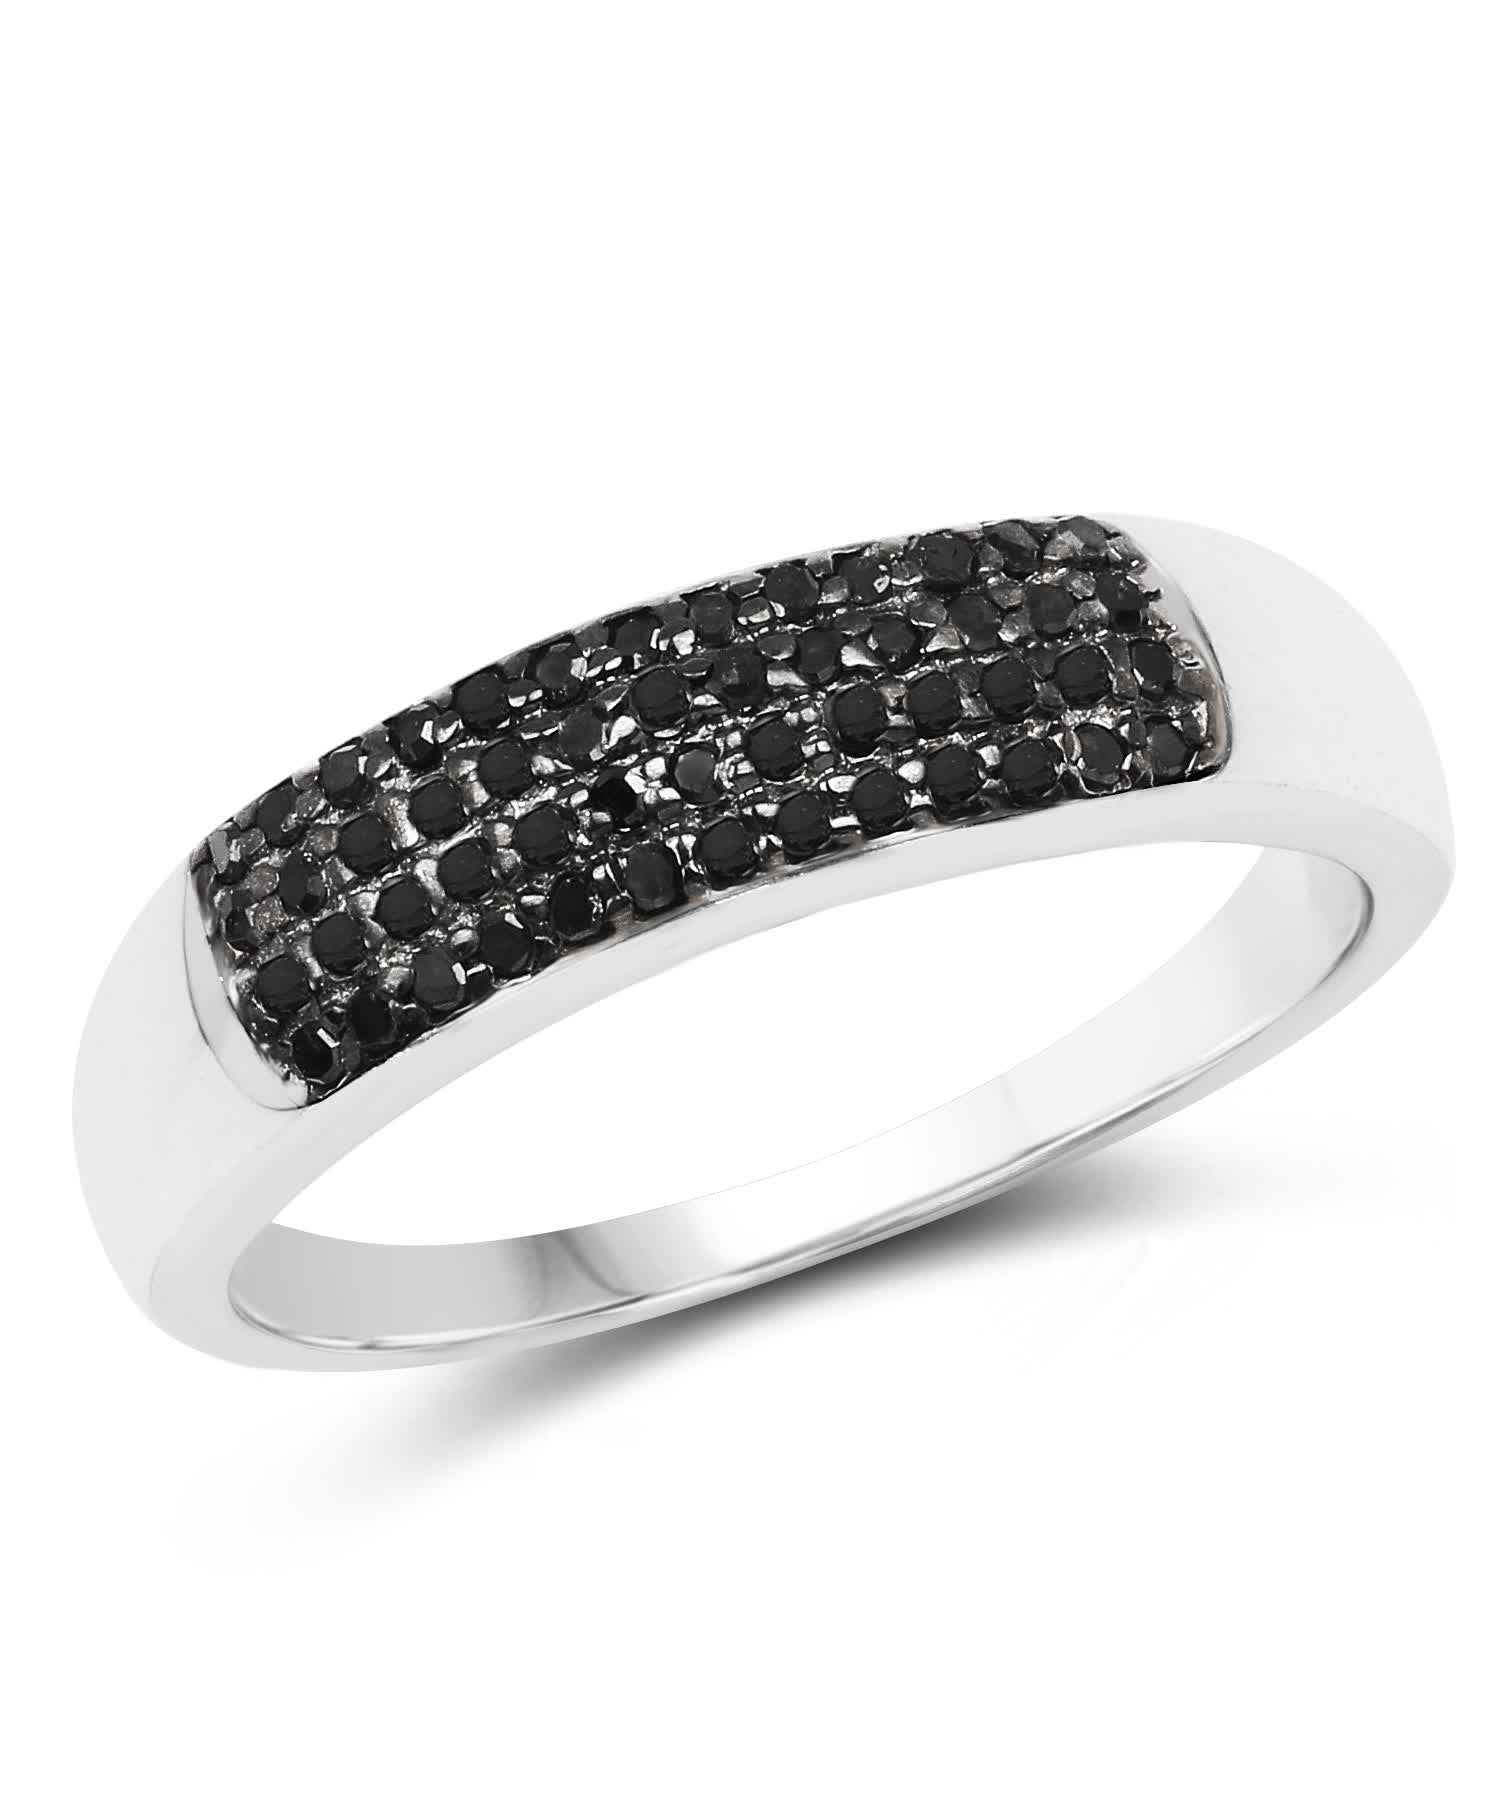 Black Diamond Rhodium Plated 925 Sterling Silver Band View 1